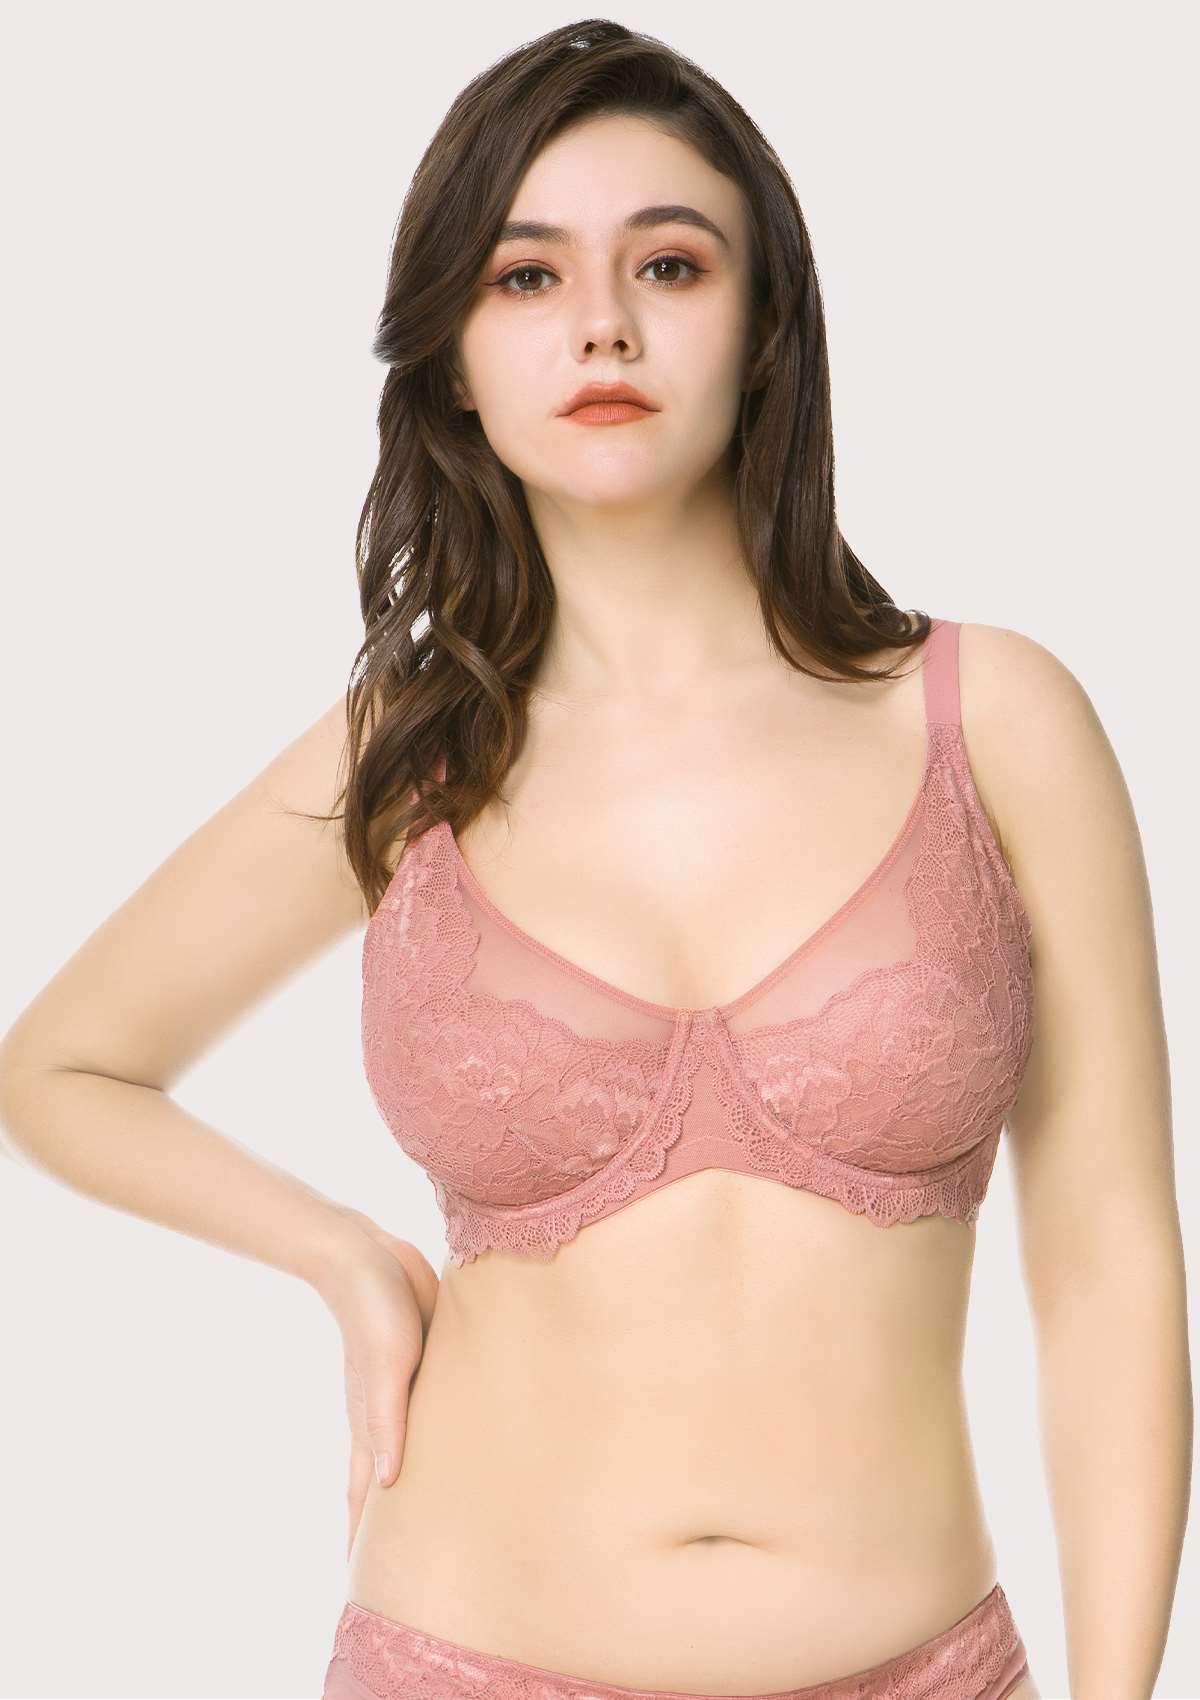 HSIA Peony Lace Unlined Supportive Underwire Bra - Purple / 38 / C